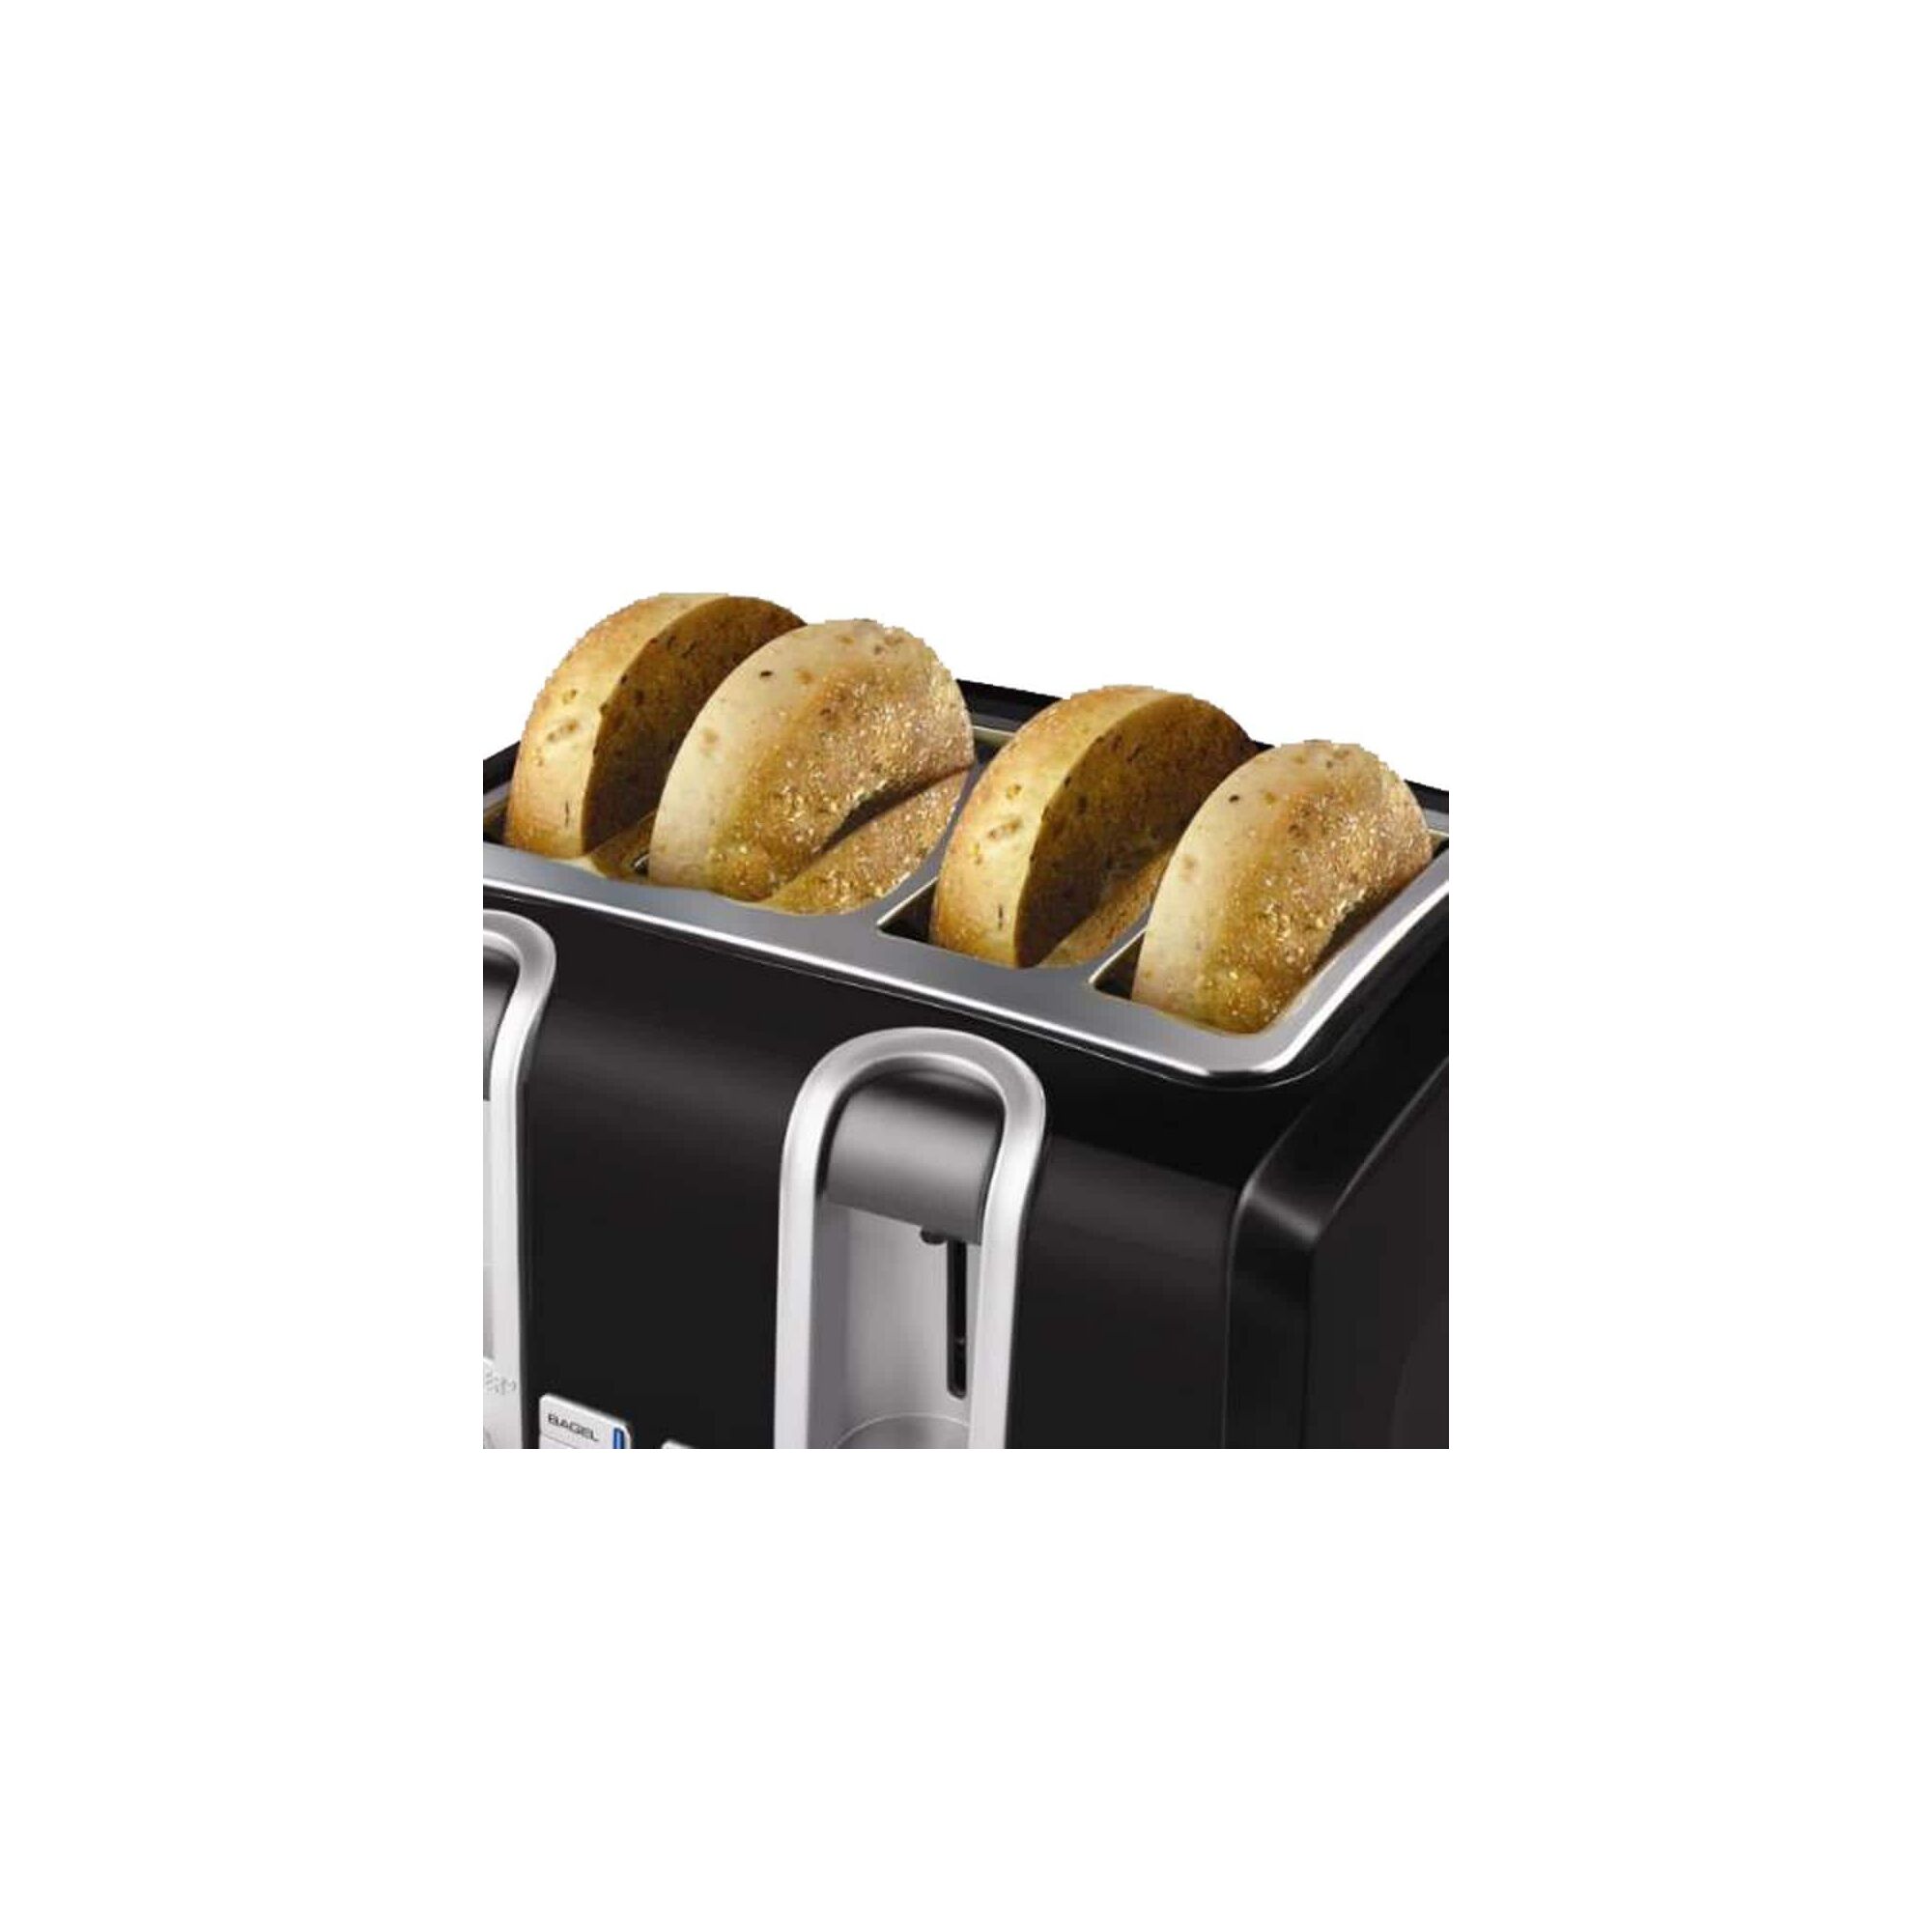 4-Slice Toaster with bagels.